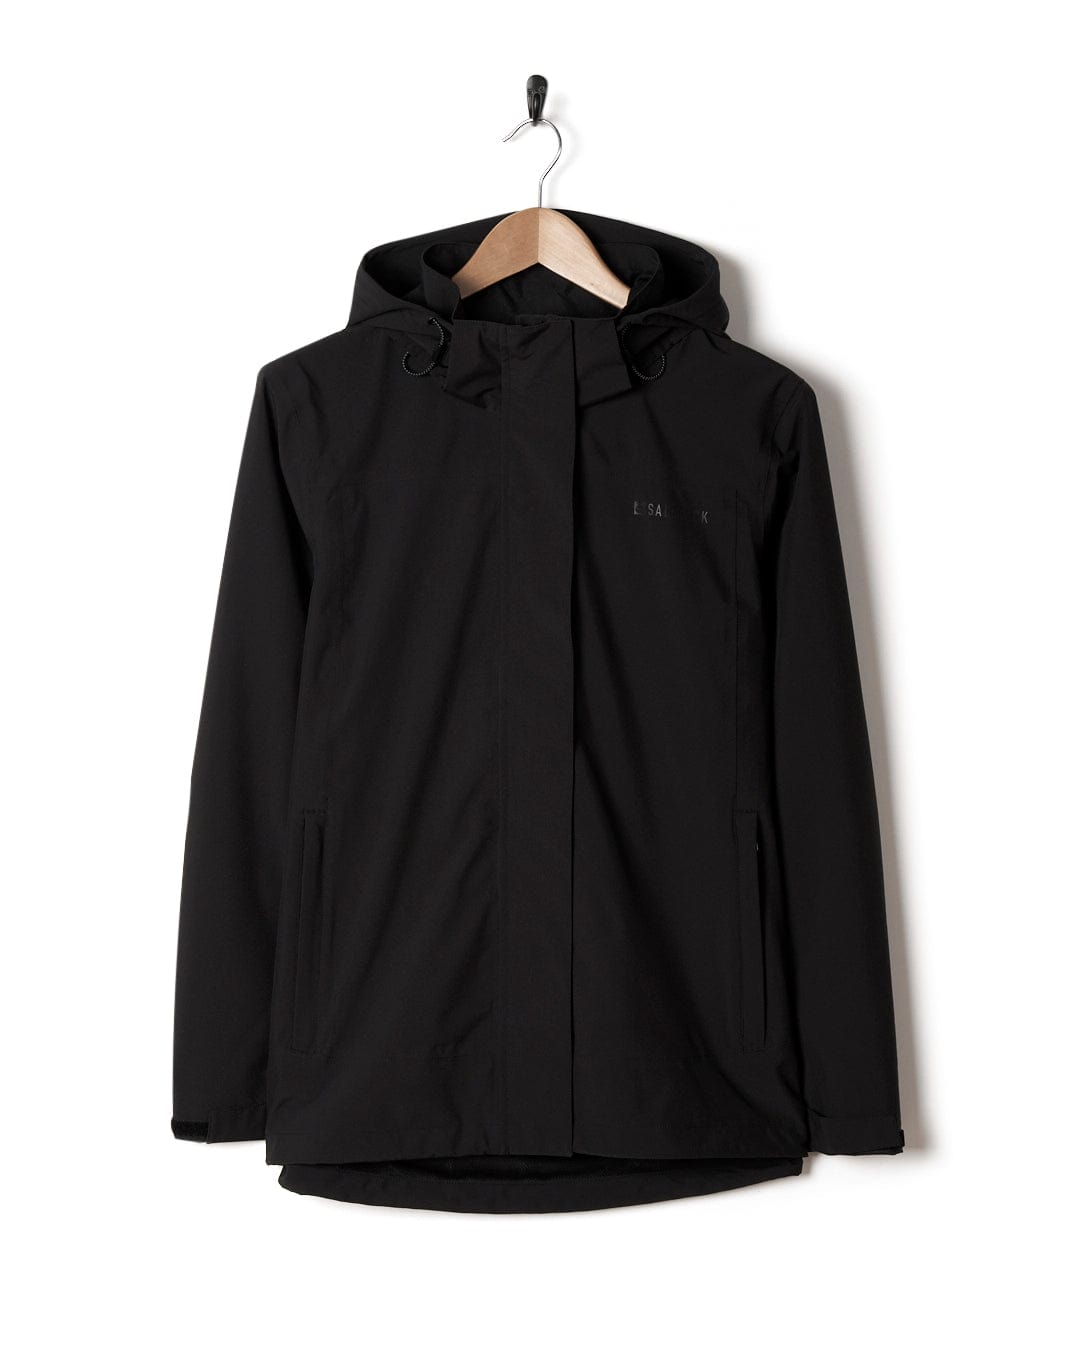 A Saltrock Aubrey - Womens Waterproof Jacket in Black, displayed on a wooden hanger against a white background.